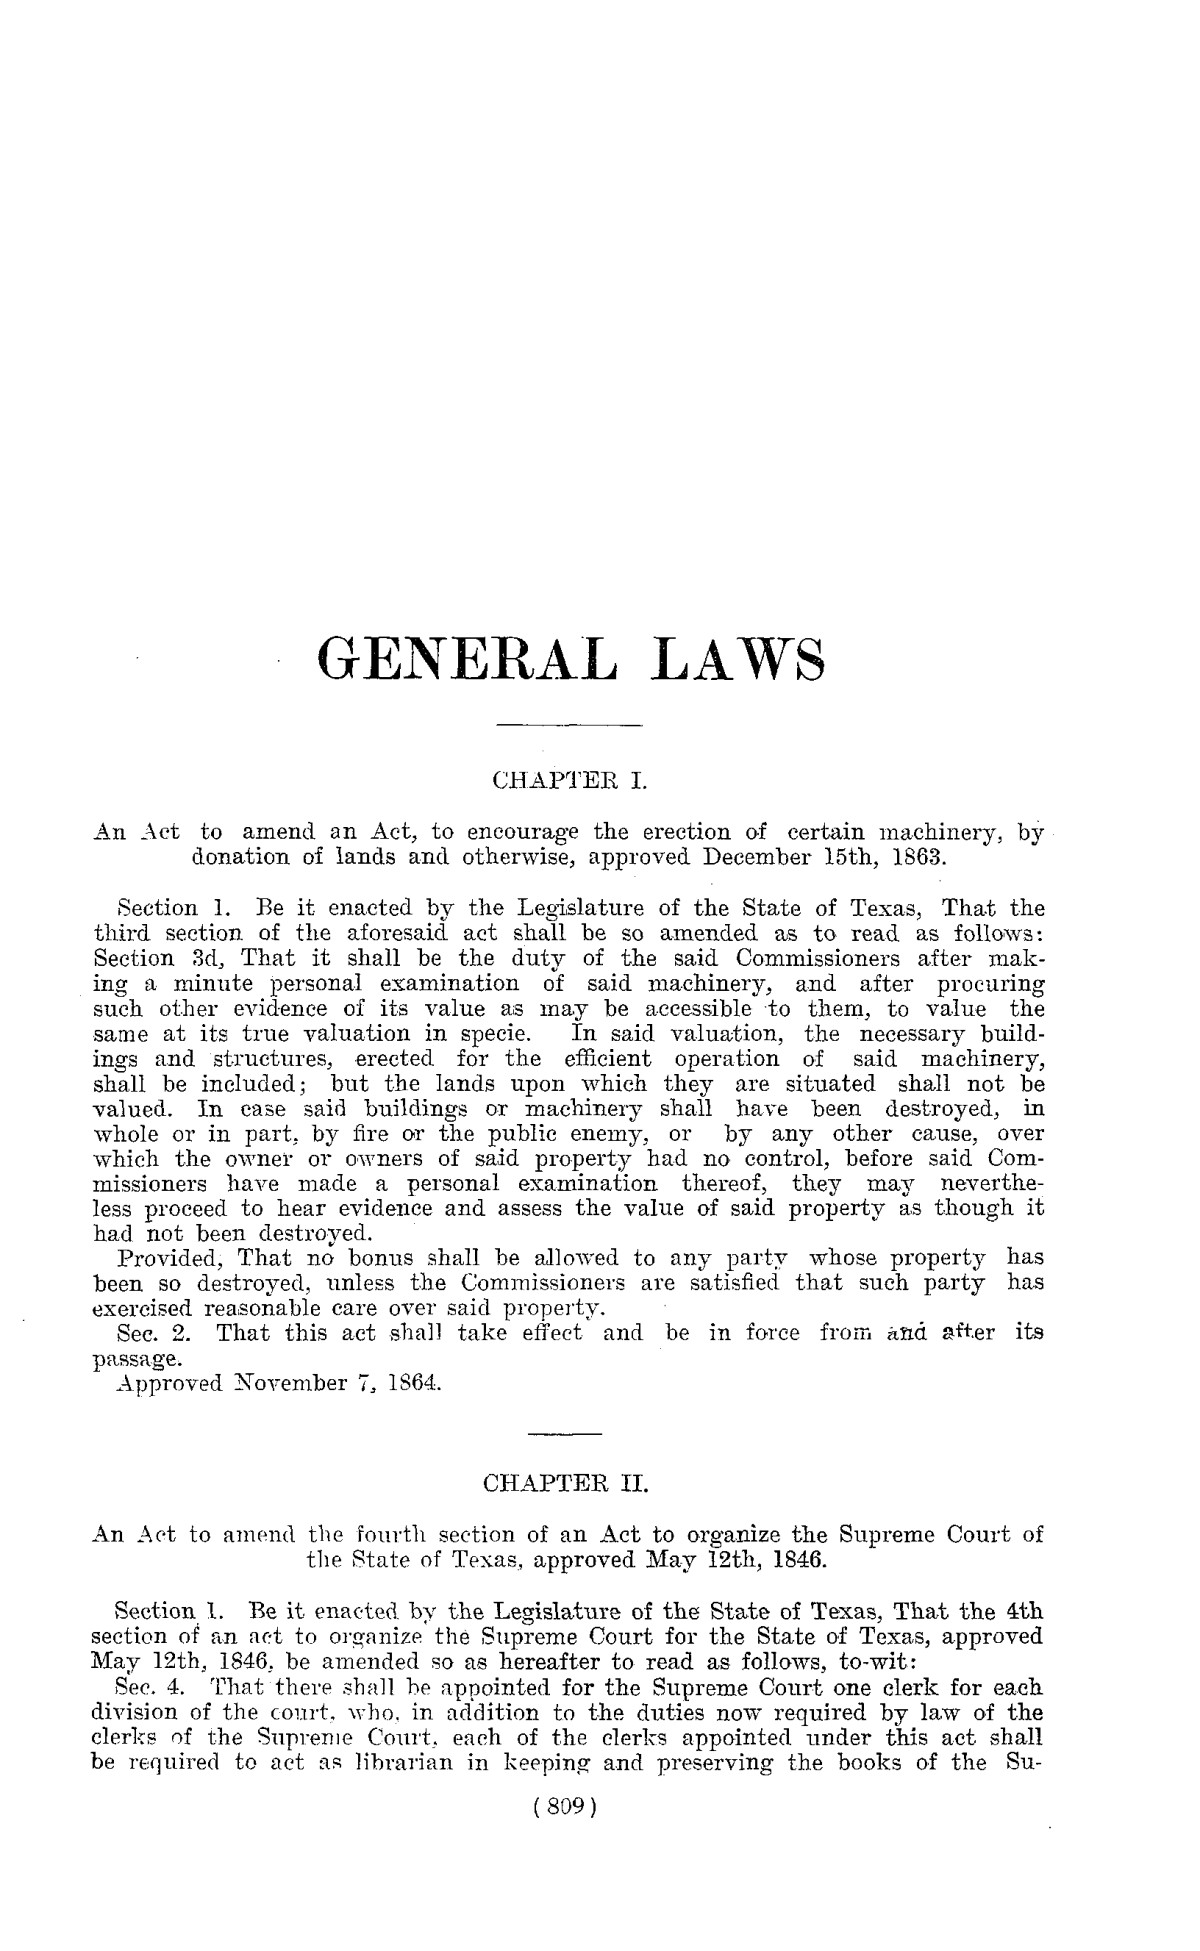 The Laws of Texas, 1822-1897 Volume 5
                                                
                                                    809
                                                